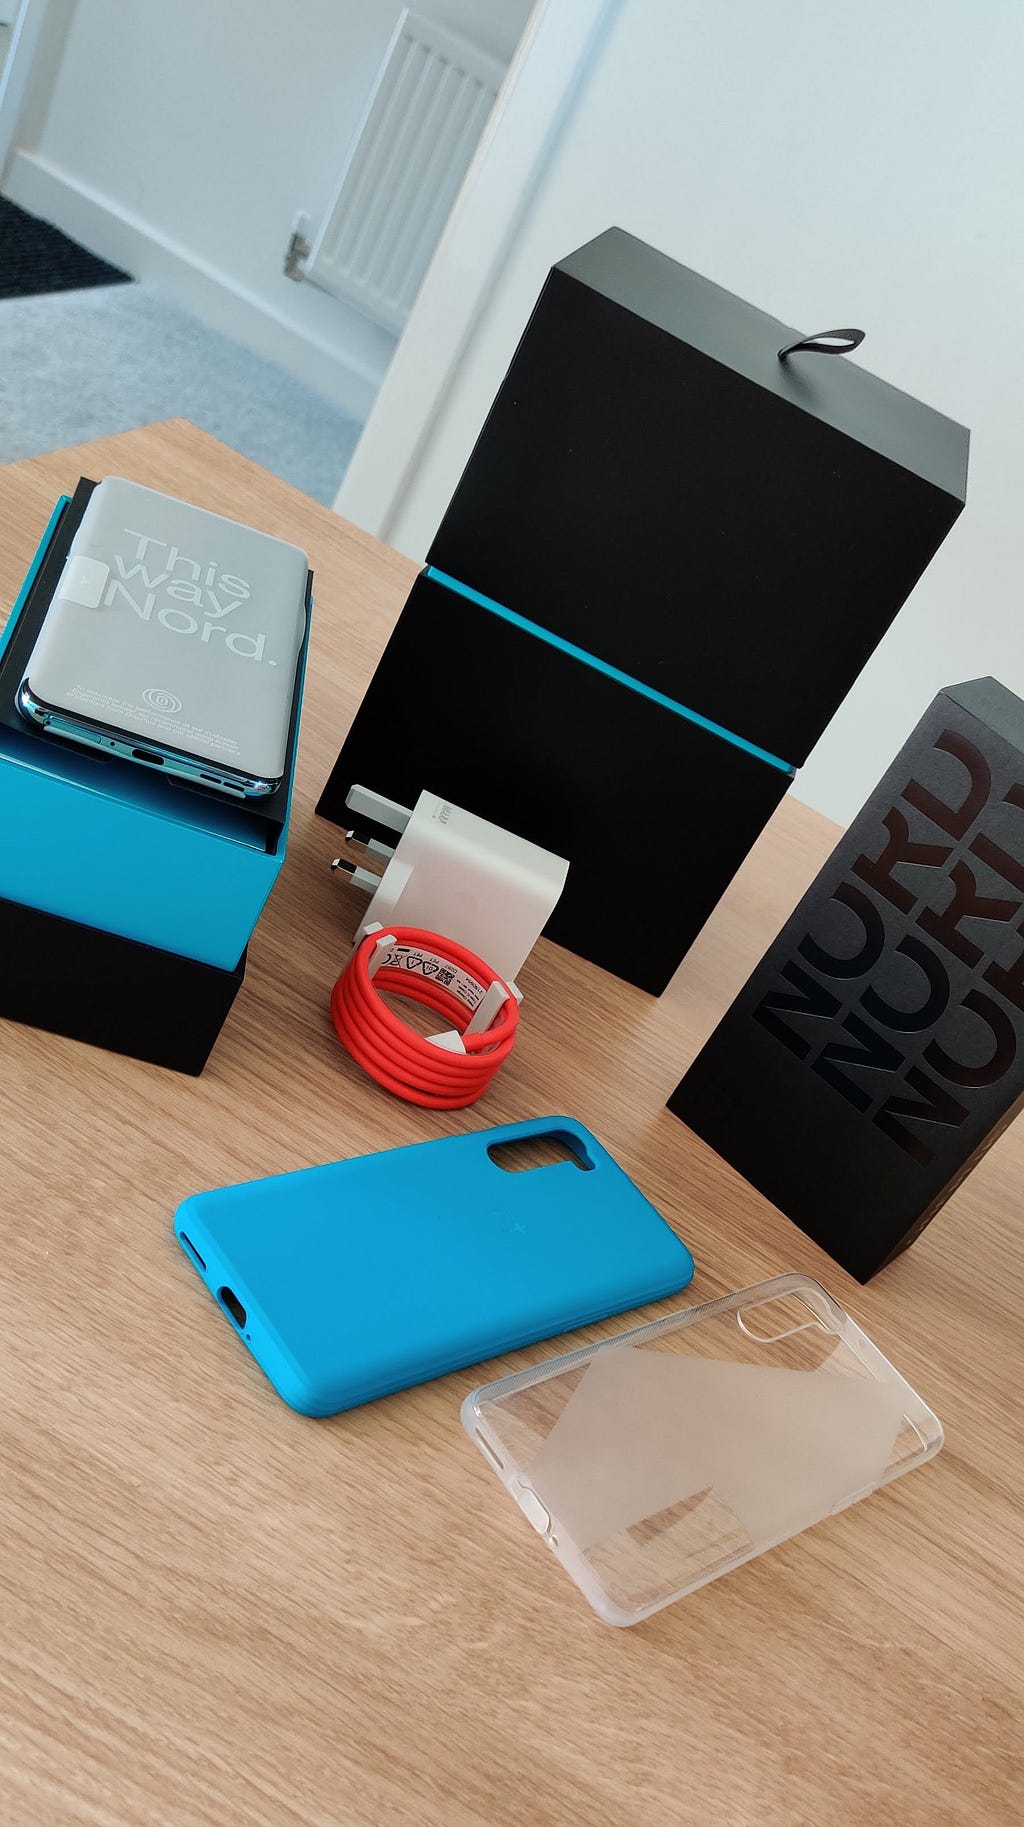 OnePlus Nord along with accessories such as charger and sandstone case.